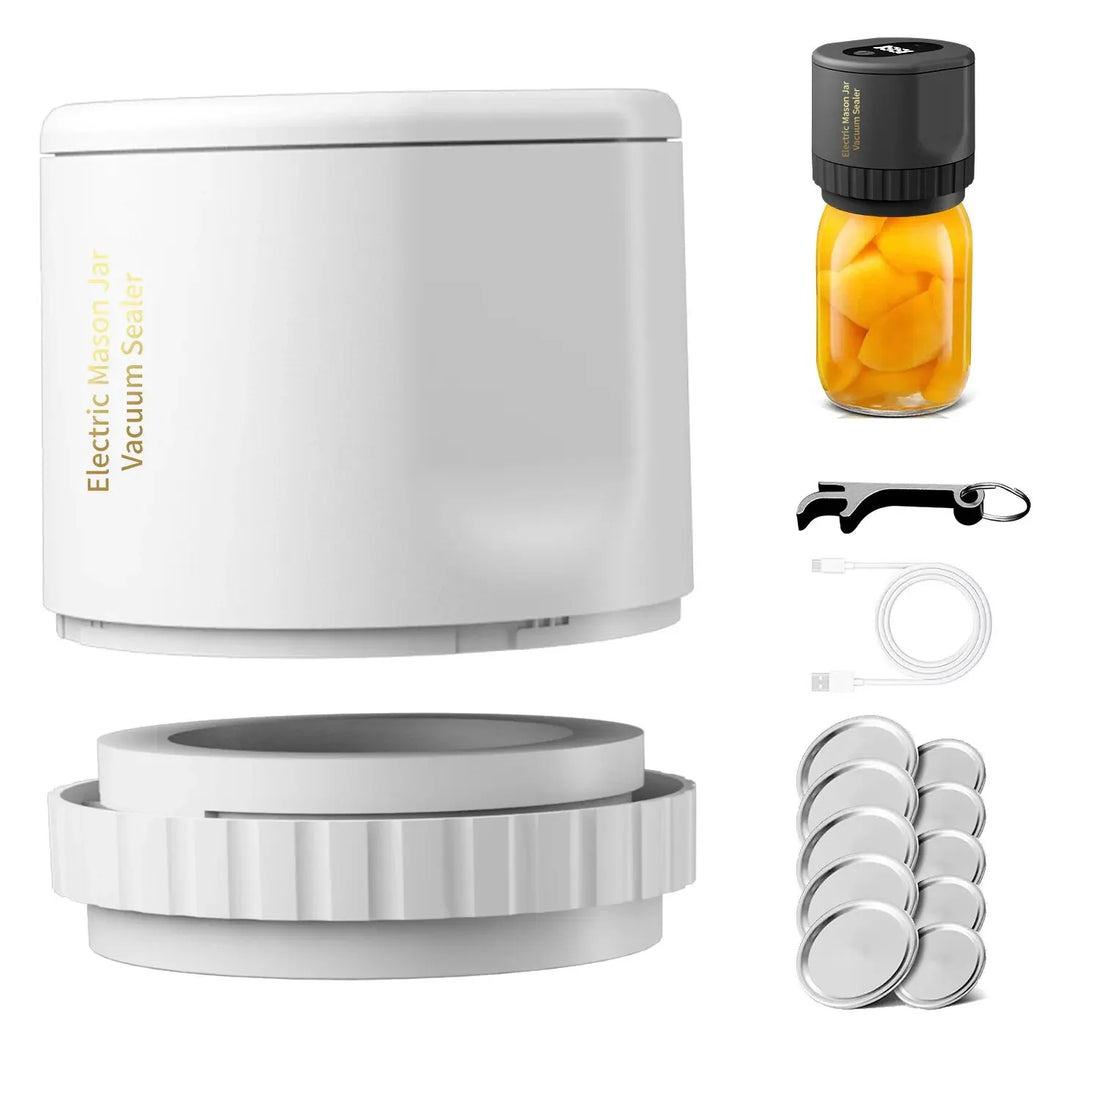 Soulful Trading Electric Mason Jar Vacuum Sealer with accessories including a bottle stopper, hose, caps, and a jar of preserved fruit to seal freshness.